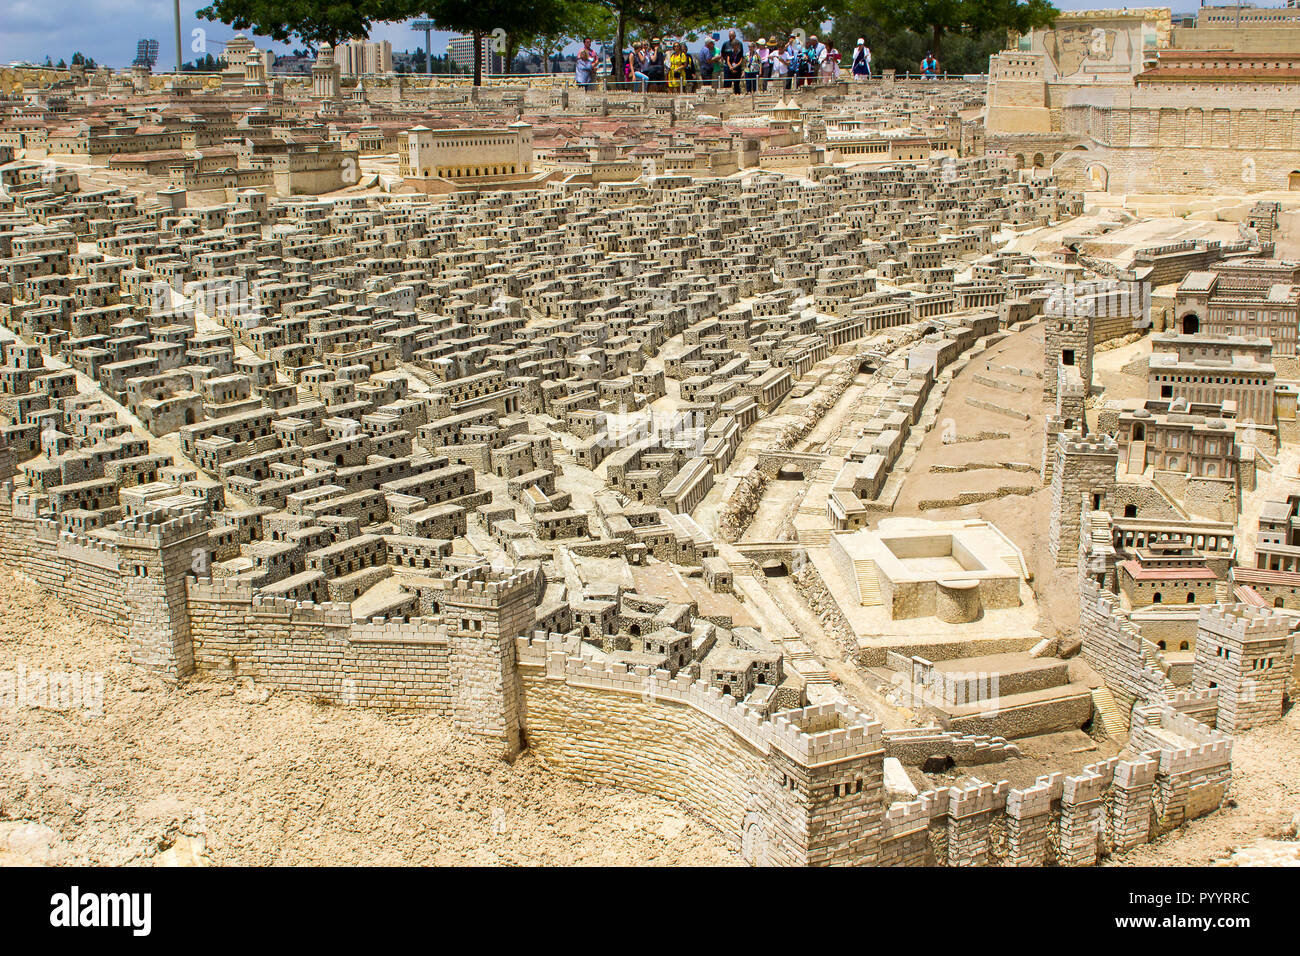 9 May 2018 Visitors walk around the outdoor scale model of the ancient city of Jerusalem at the Israel Museum in Jerusalem. The model has many arbitra Stock Photo